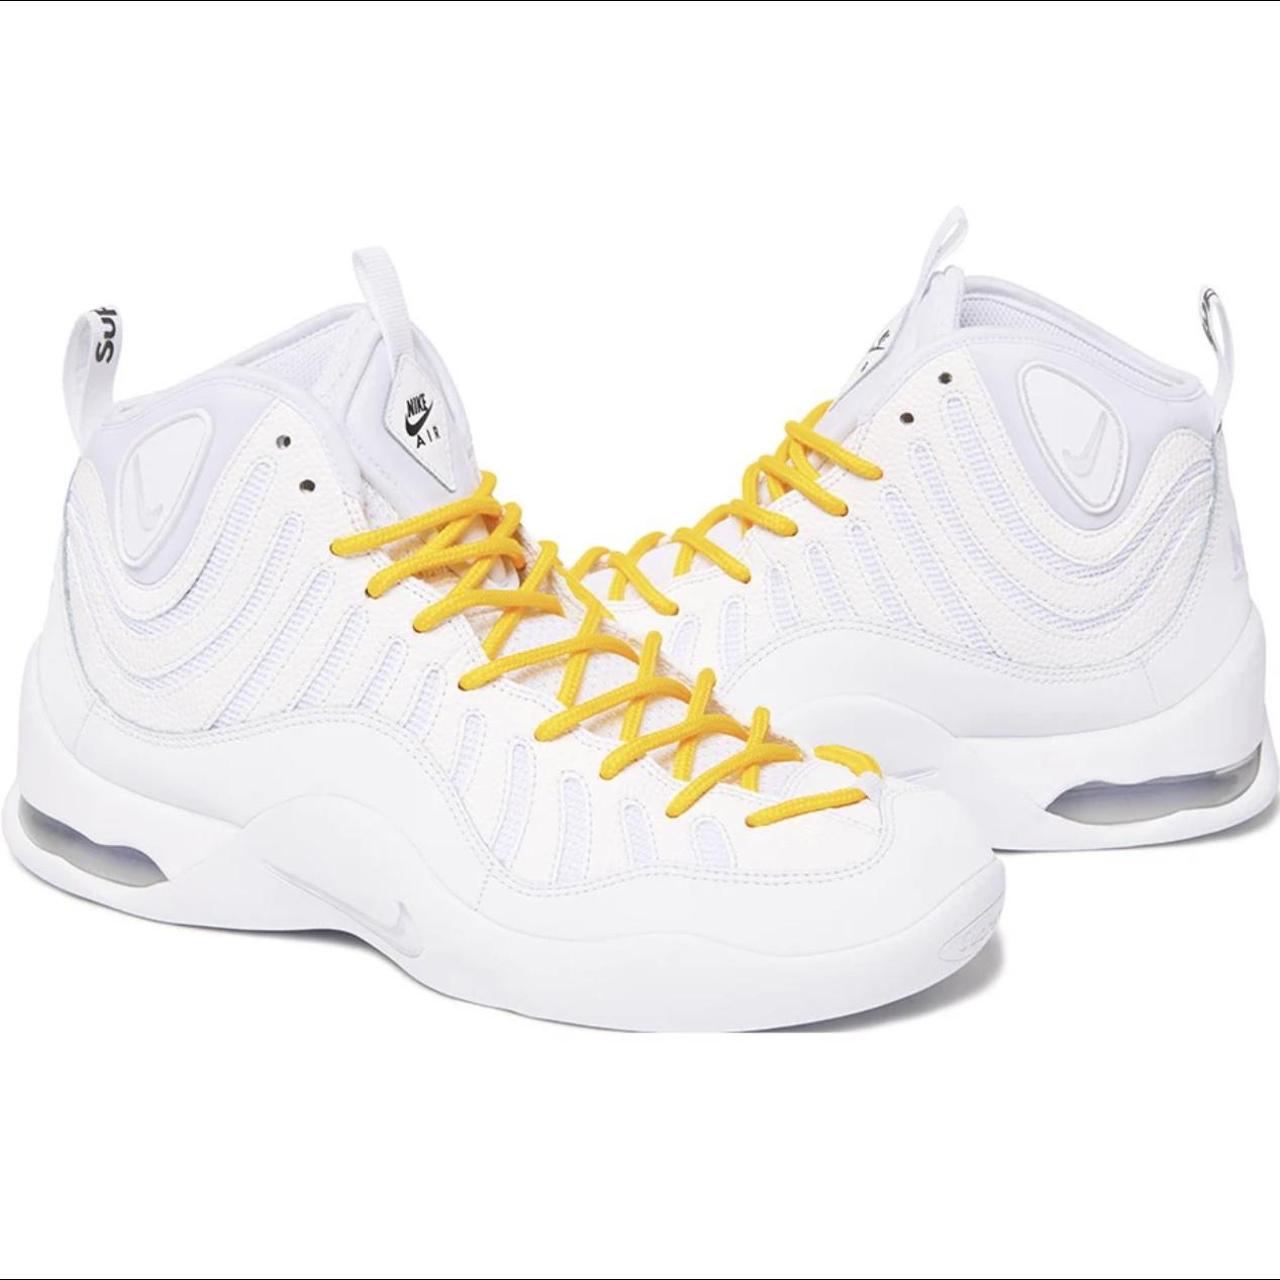 Nike Air Bakin Supreme Edition Shoes — Released... - Depop